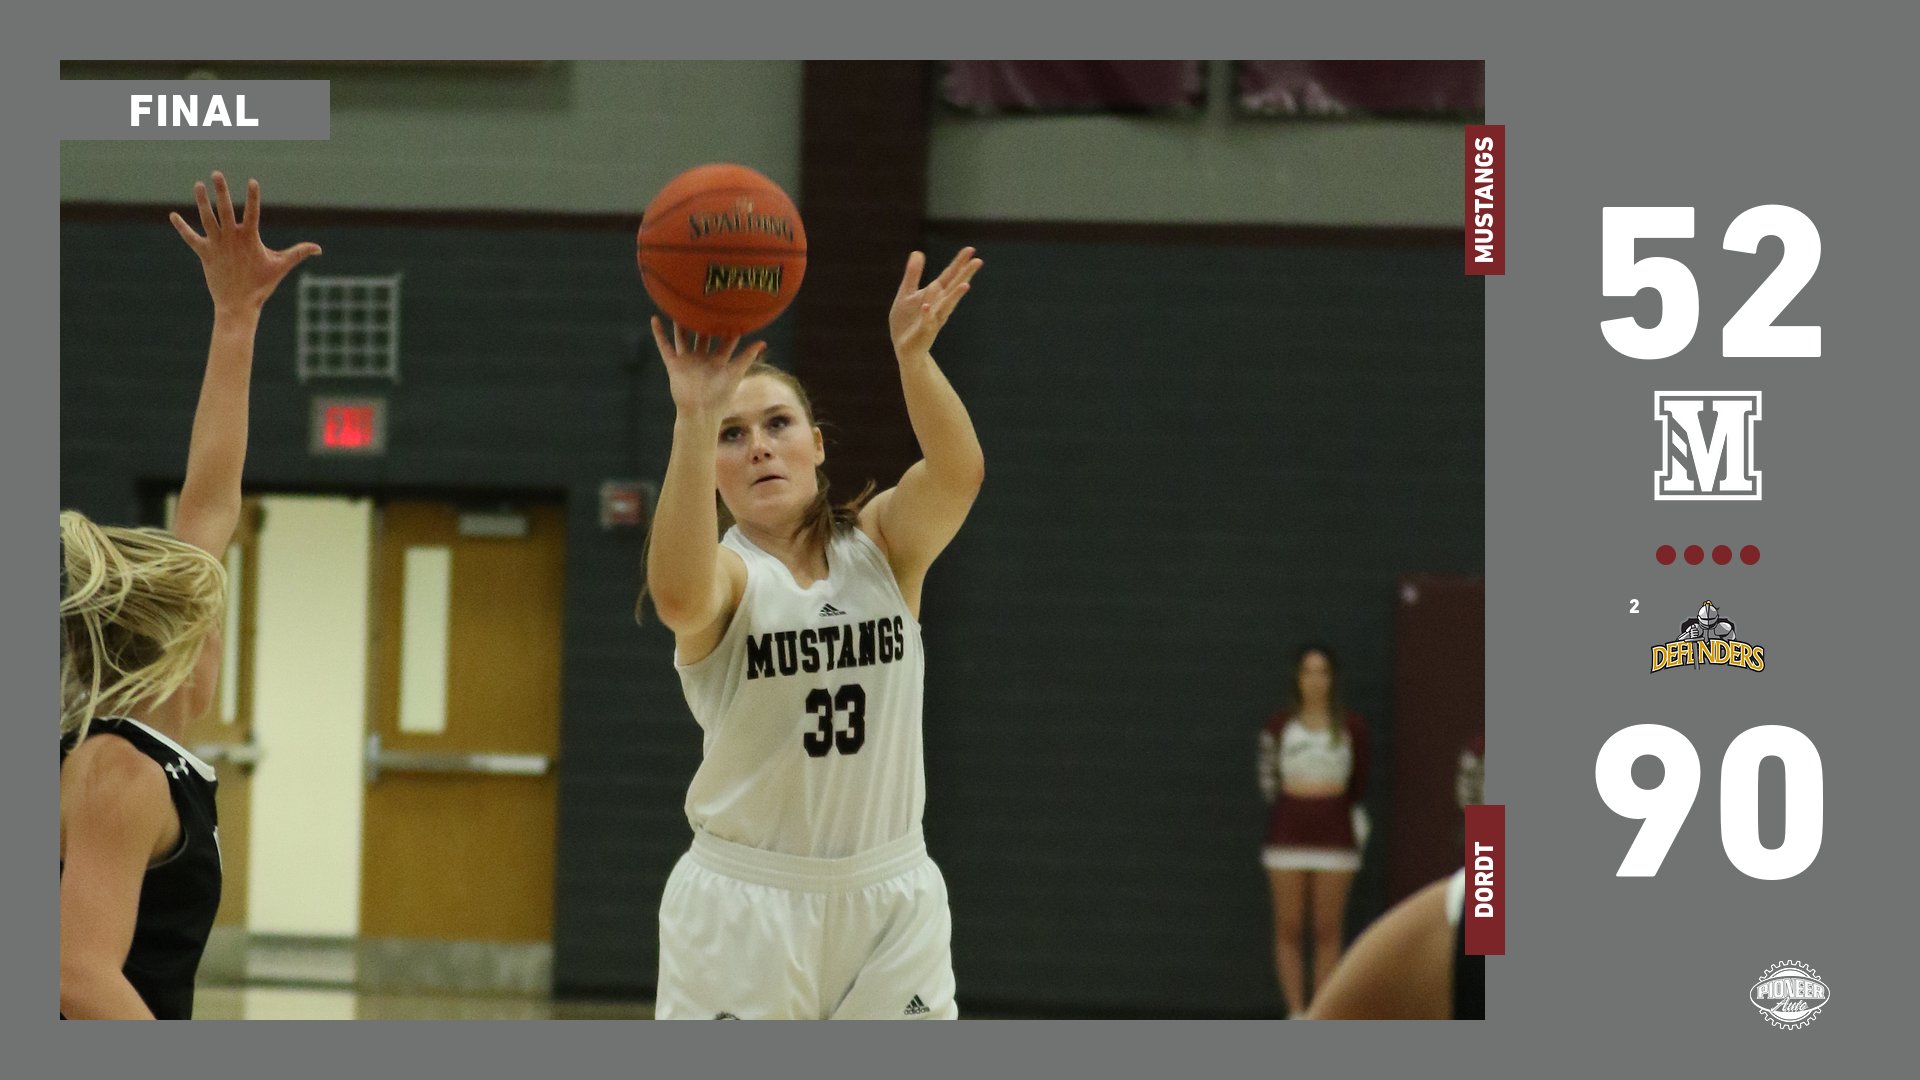 Lily Vollertsen leads Mustangs in 90-52 loss to Dordt